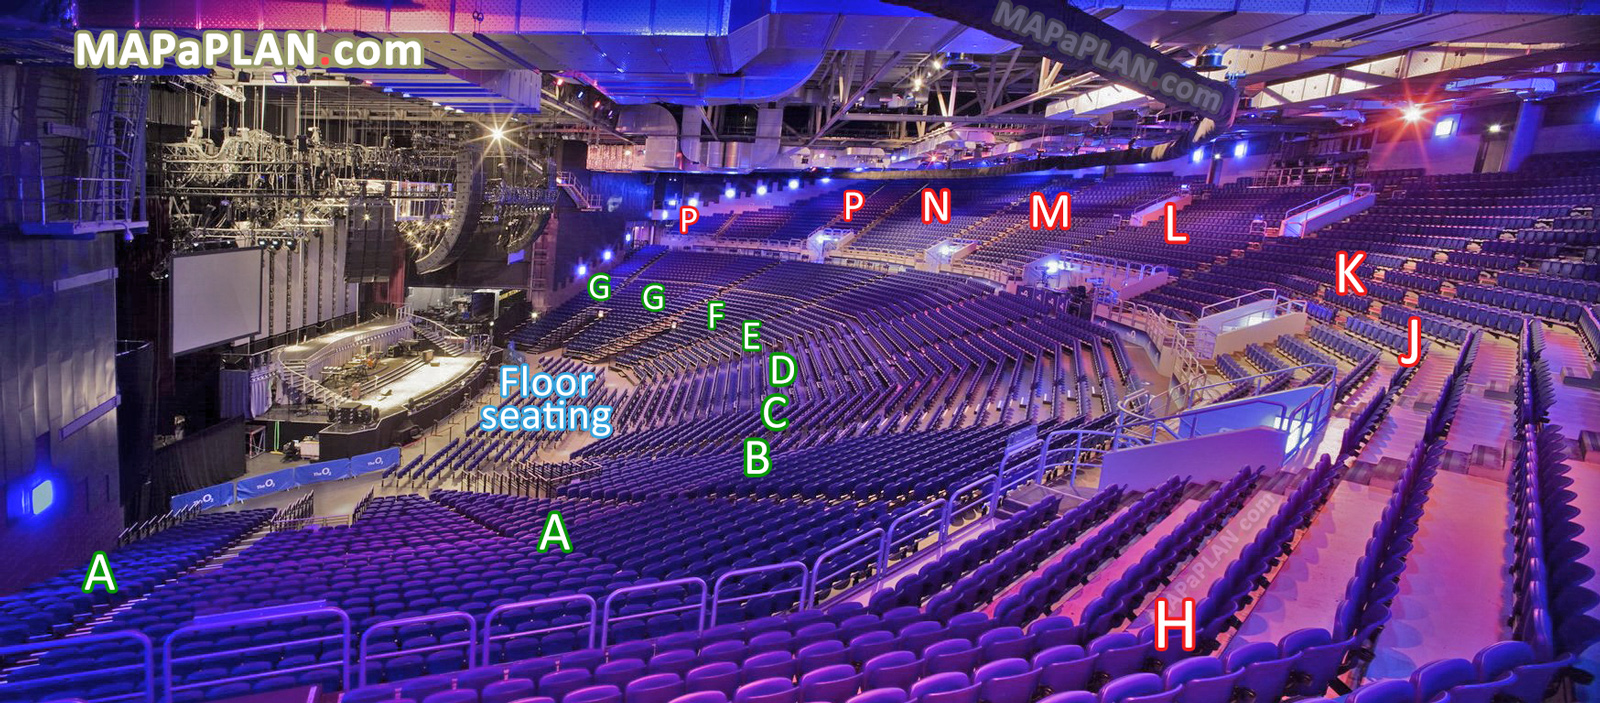 the-o2-arena-dublin-seating-plan-02-Best-seats-viewer-View-from-Block-H-Row-40-Seat-14-3d-virtual-interactive-inside-tour-high-resolution.jpg